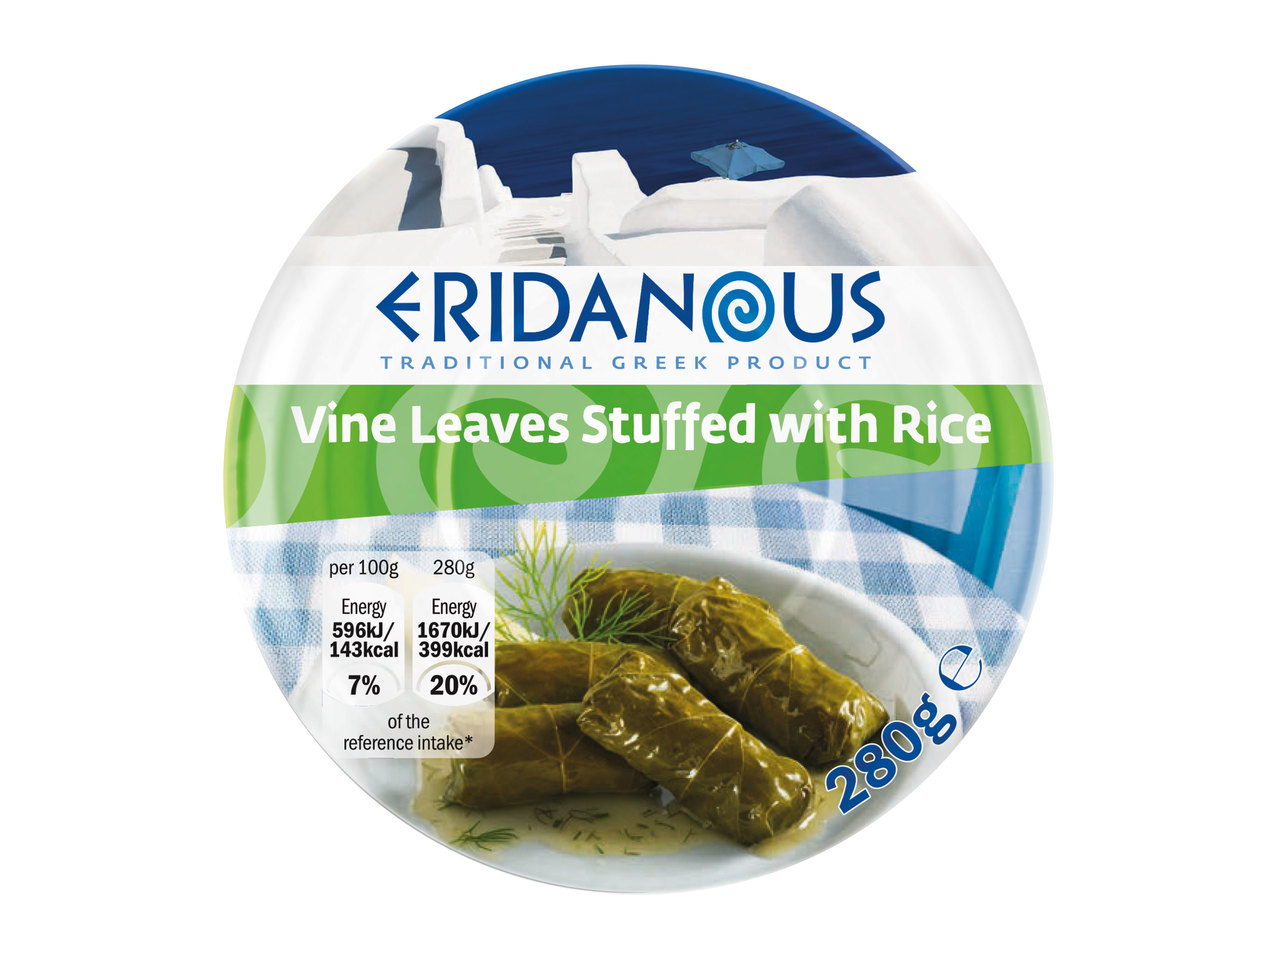 Eridanous Vine Leaves Stuffed with Rice1